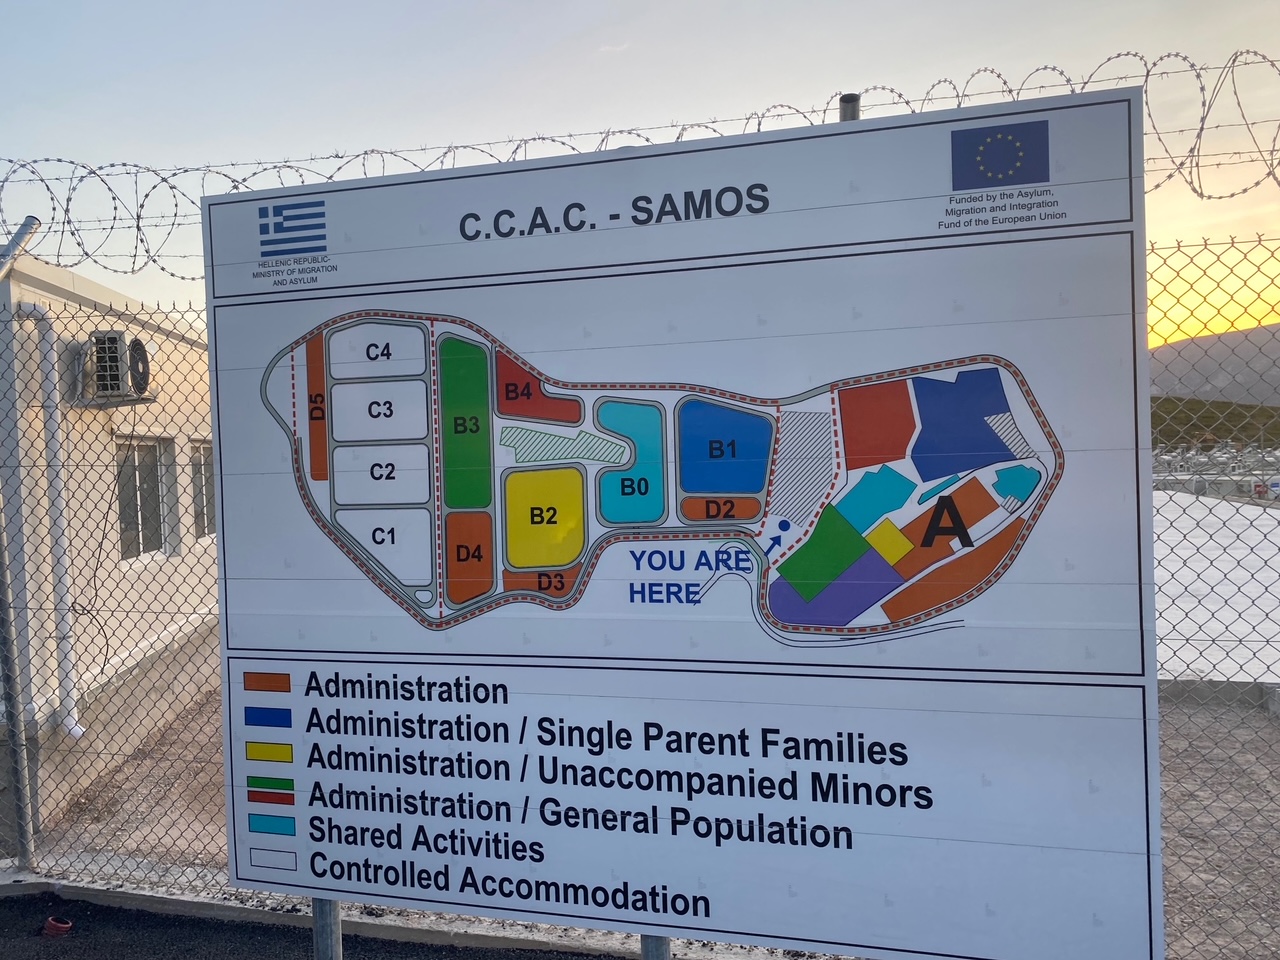 A map showing the Closed Controlles Access Centre of Samos.